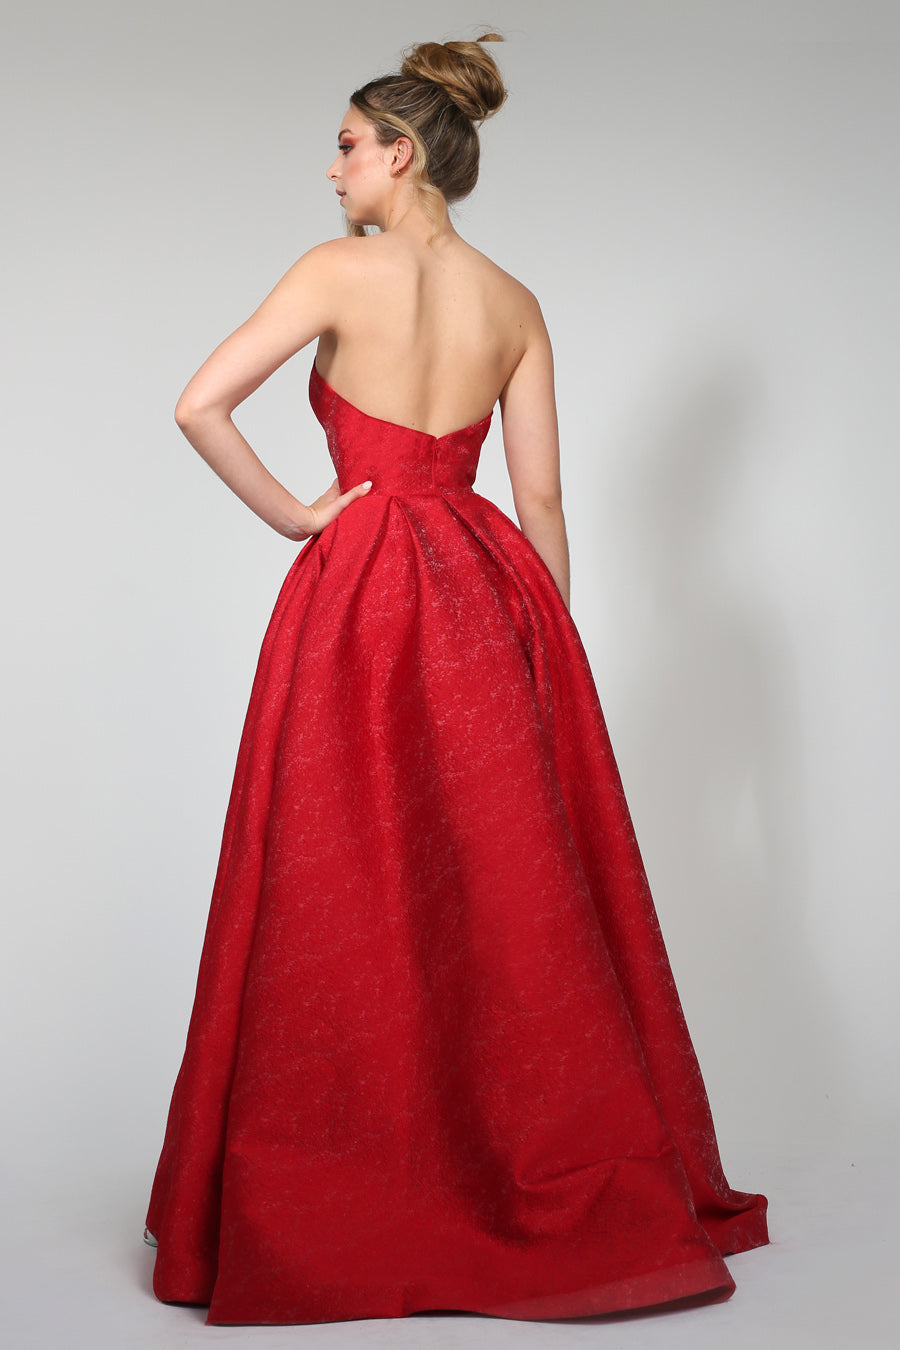 Tinaholy Couture TA611B Red Strapless Ball Gown Formal Dress {vendor} AfterPay Humm ZipPay LayBuy Sezzle